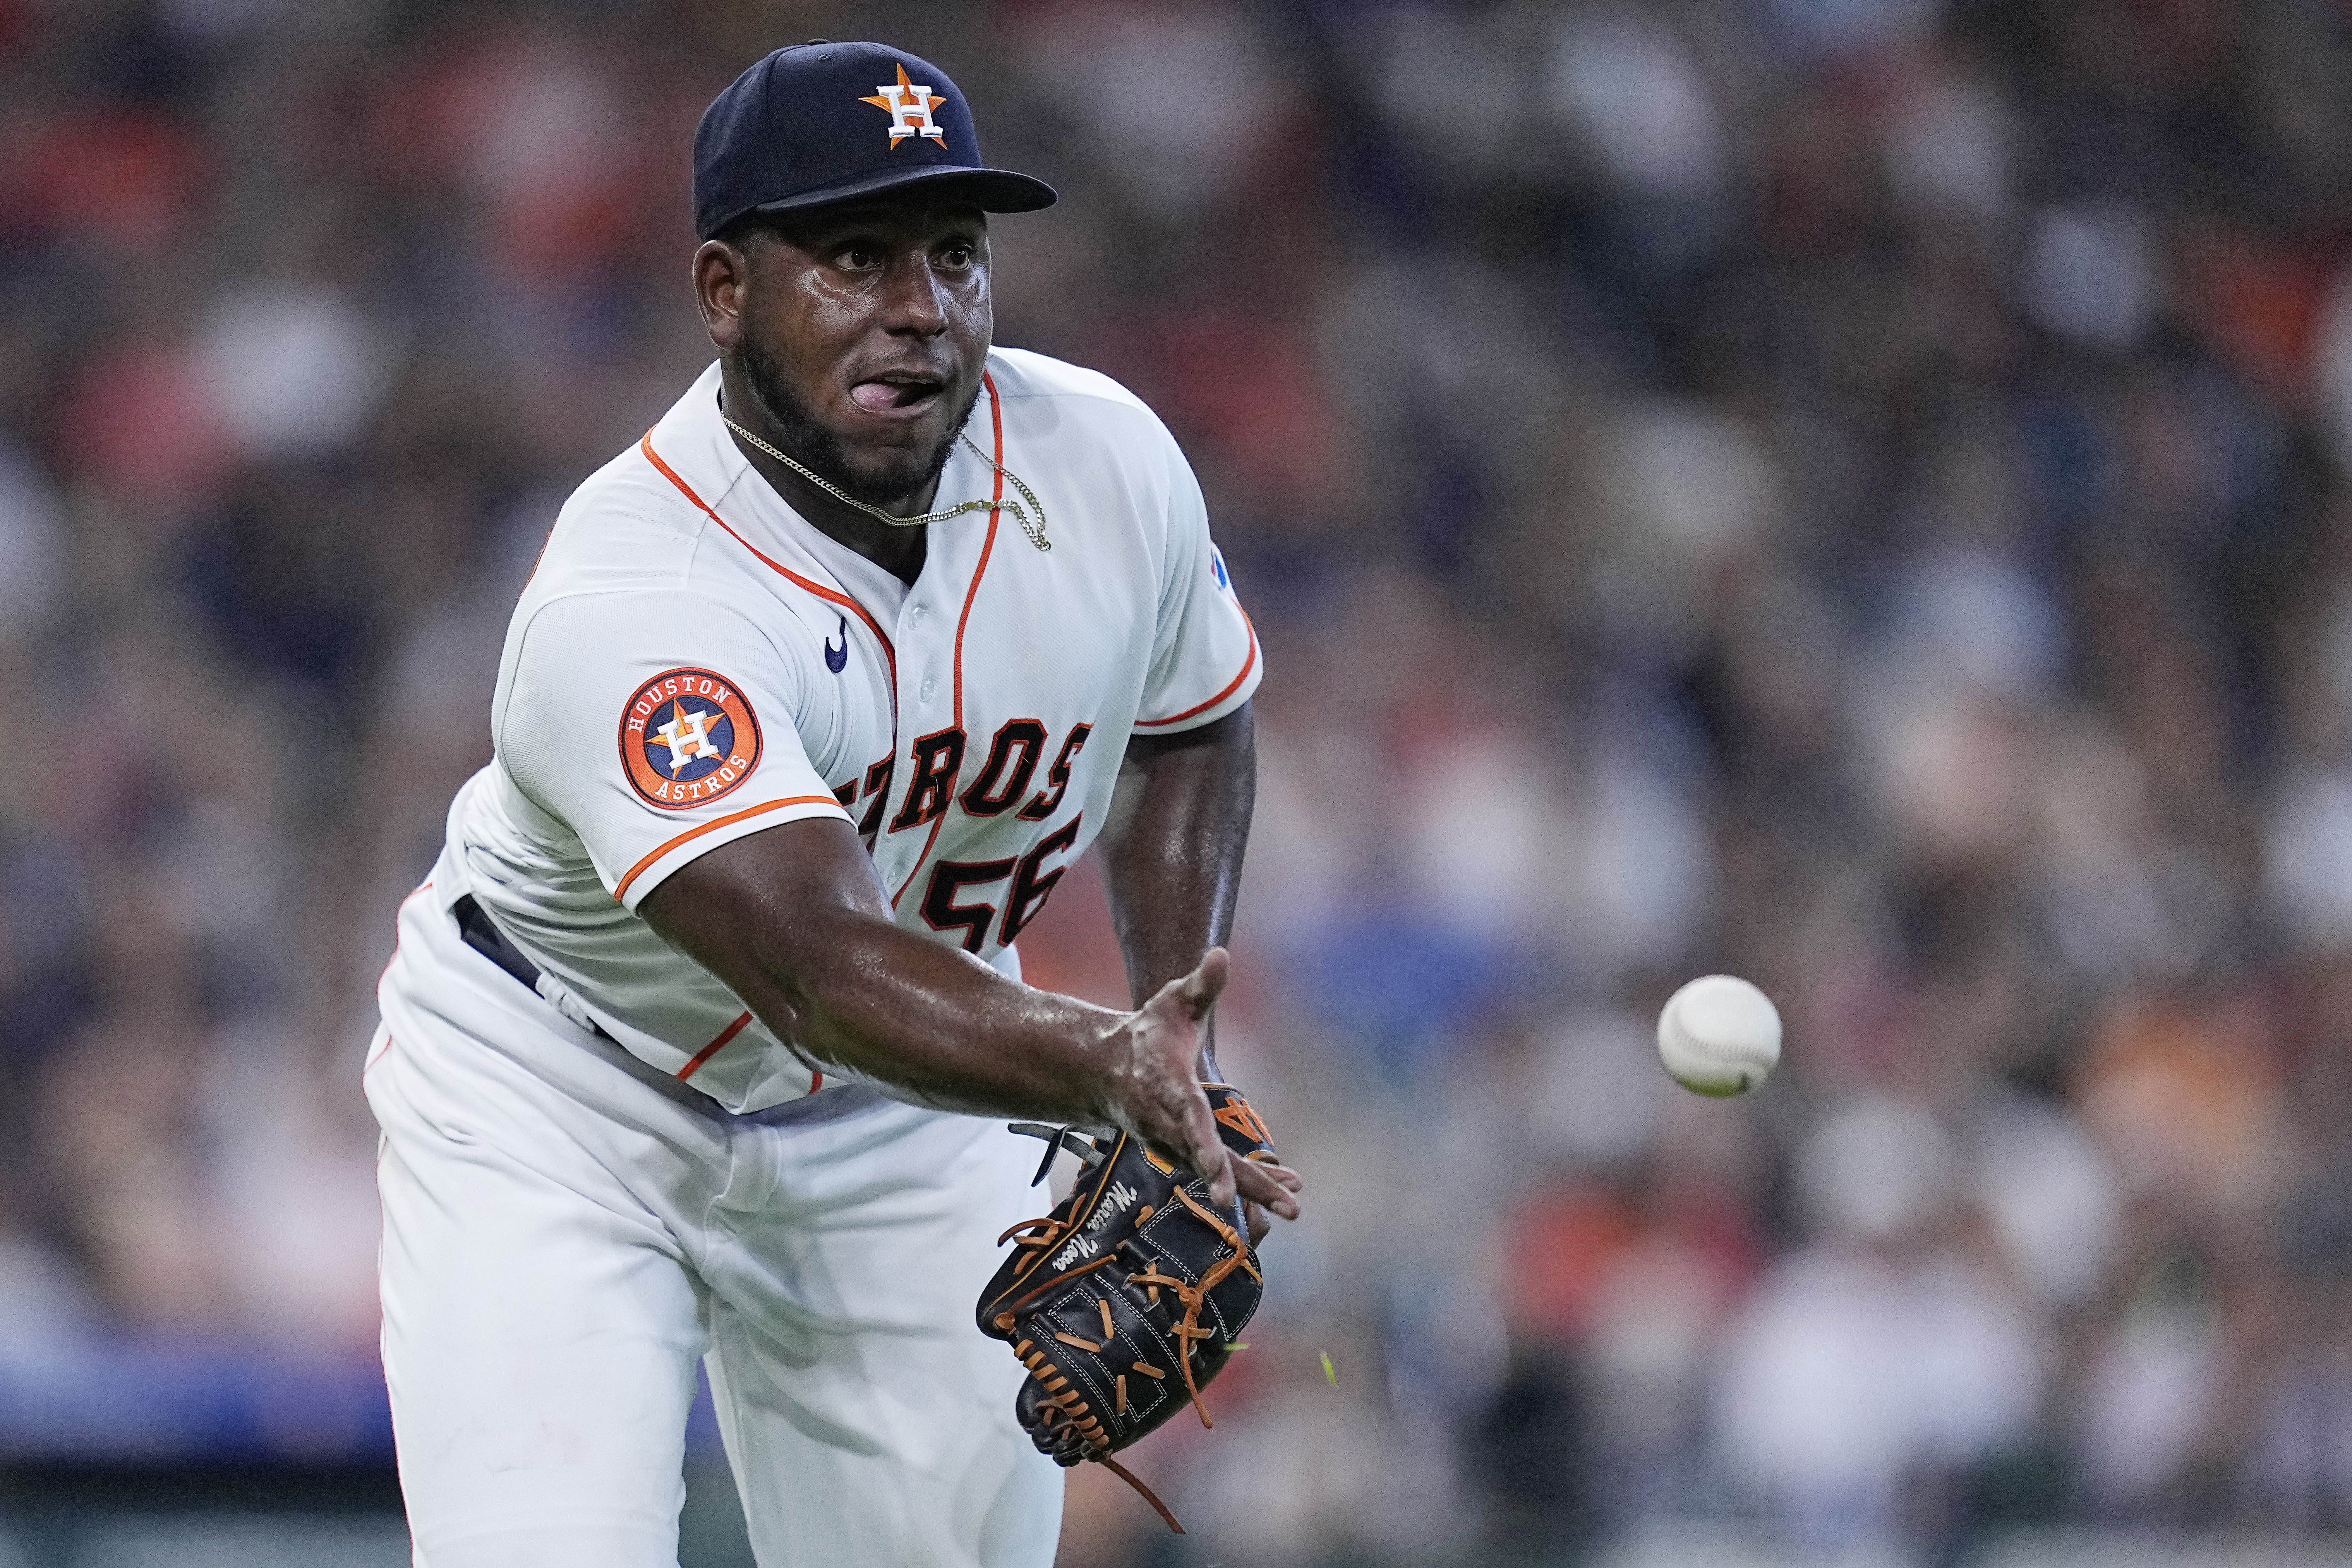 Dubon, McCormick, Pitching and New Rules in This Astros Week